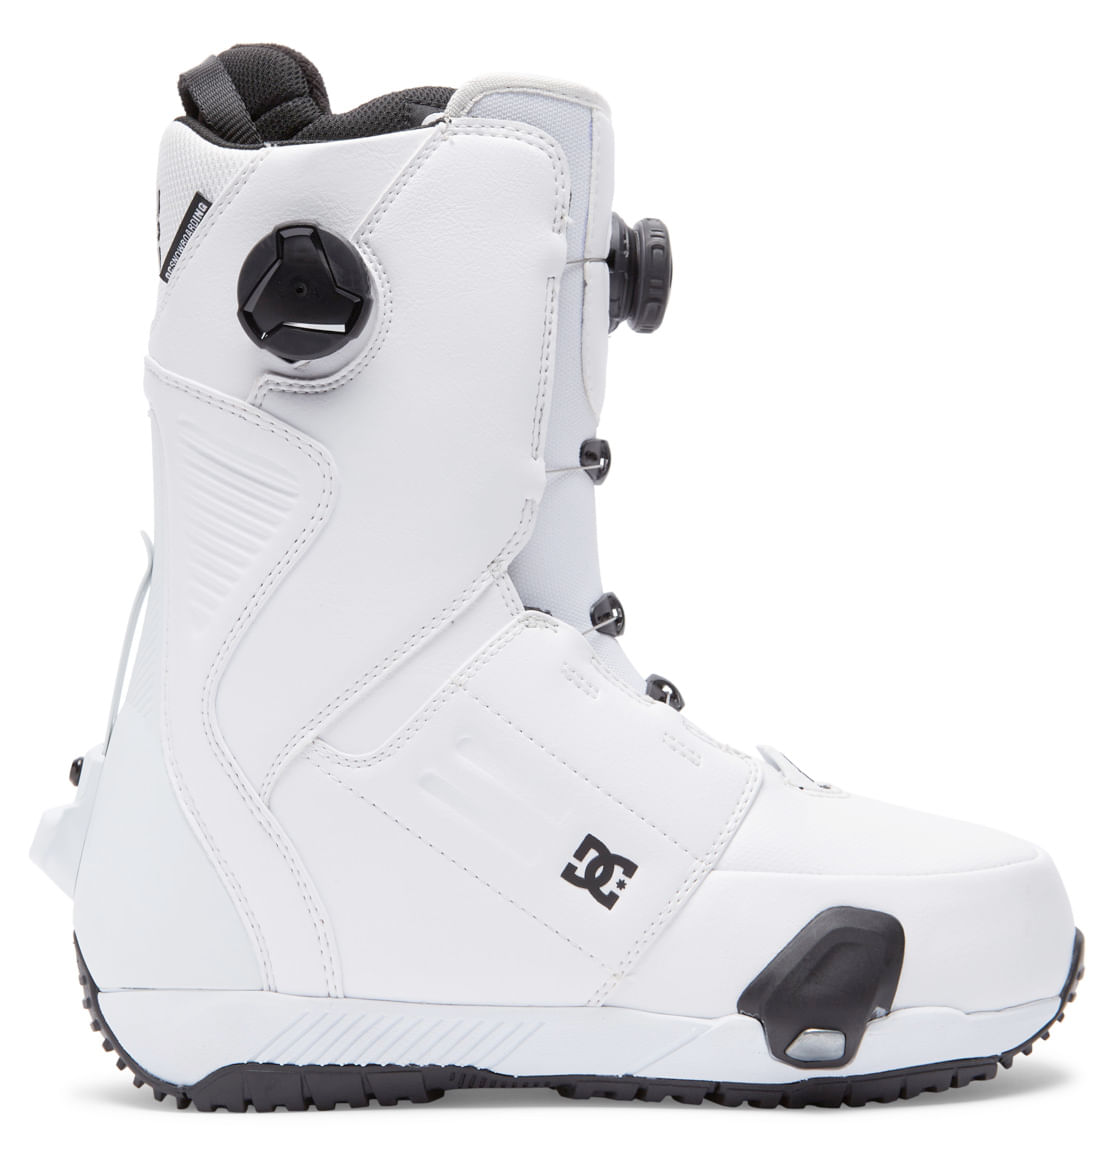 Pole Time liter 2023 DC CONTROL STEP ON BOOTS | Snowboard Boots